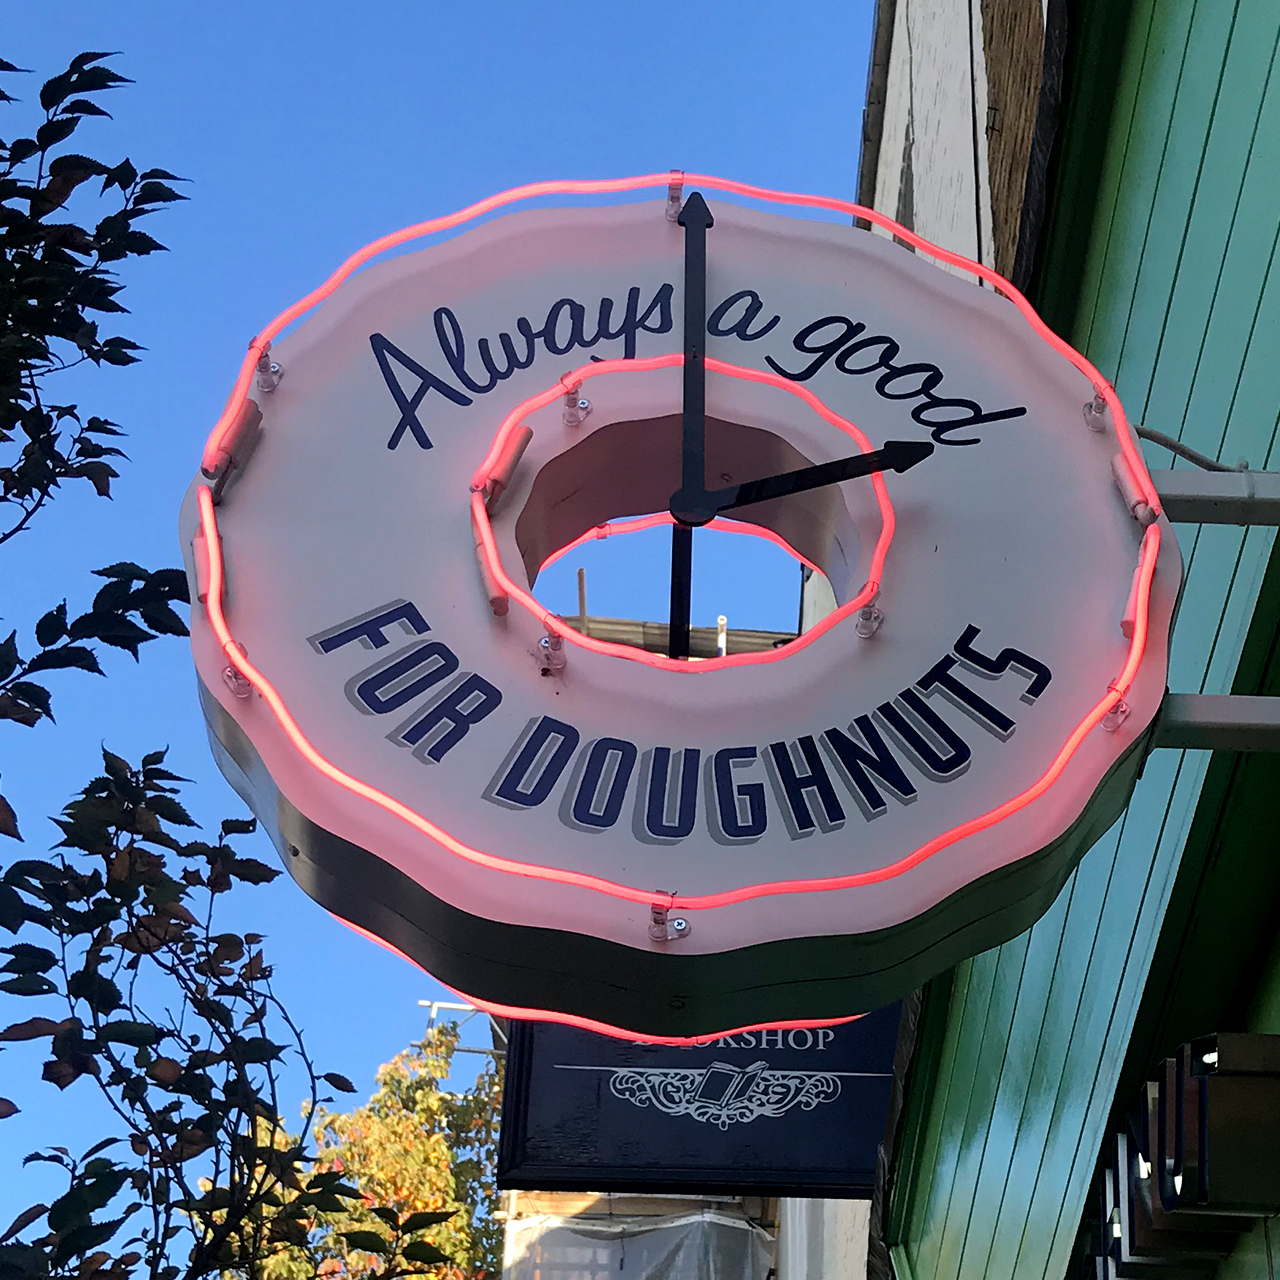 Always a good time for Doughnuts!